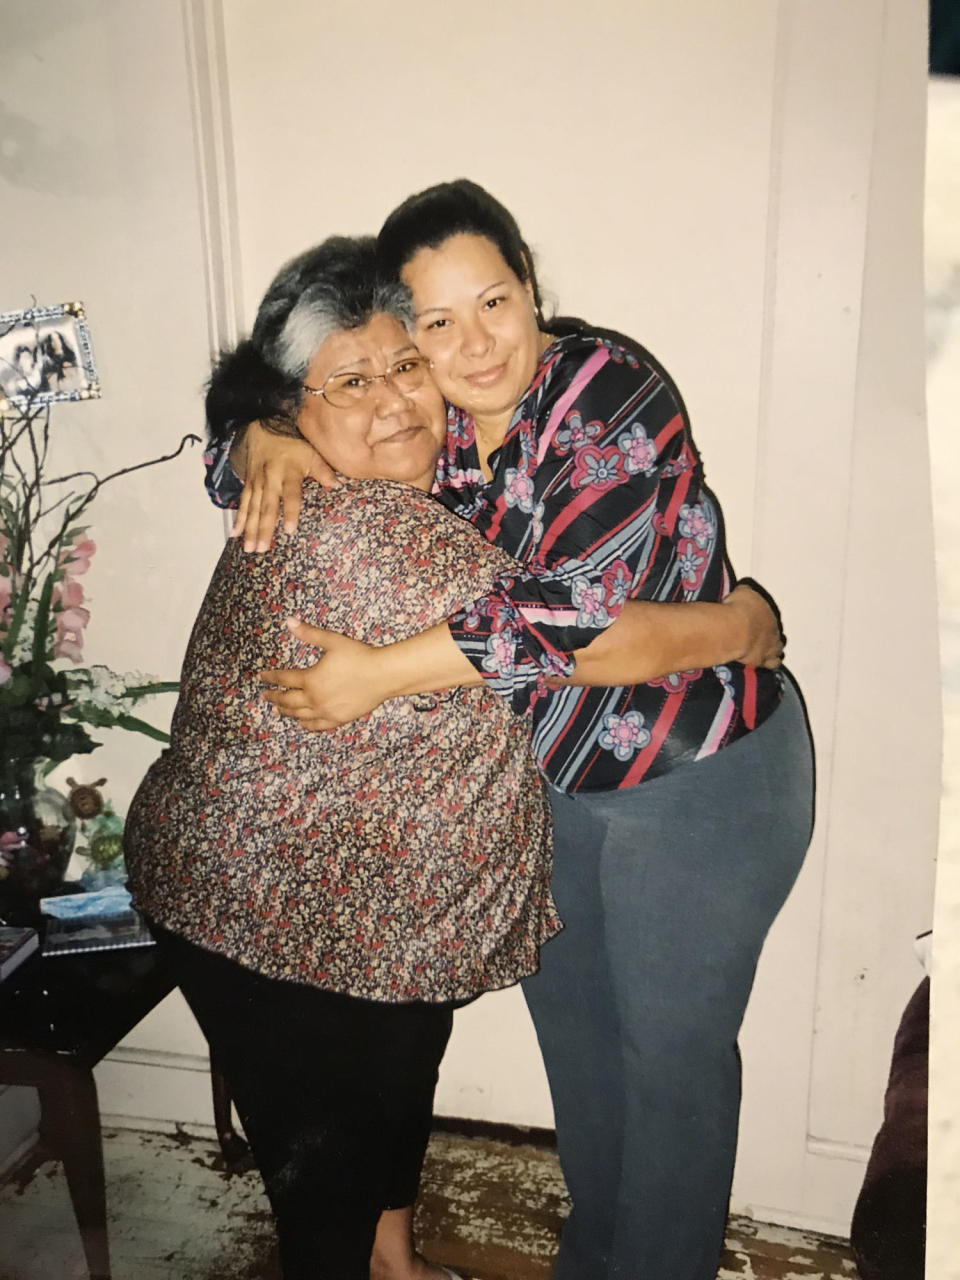 Stacey Monroe's grandmother, Martina, and tía, Mary. (Courtesy Stacey Monroe)